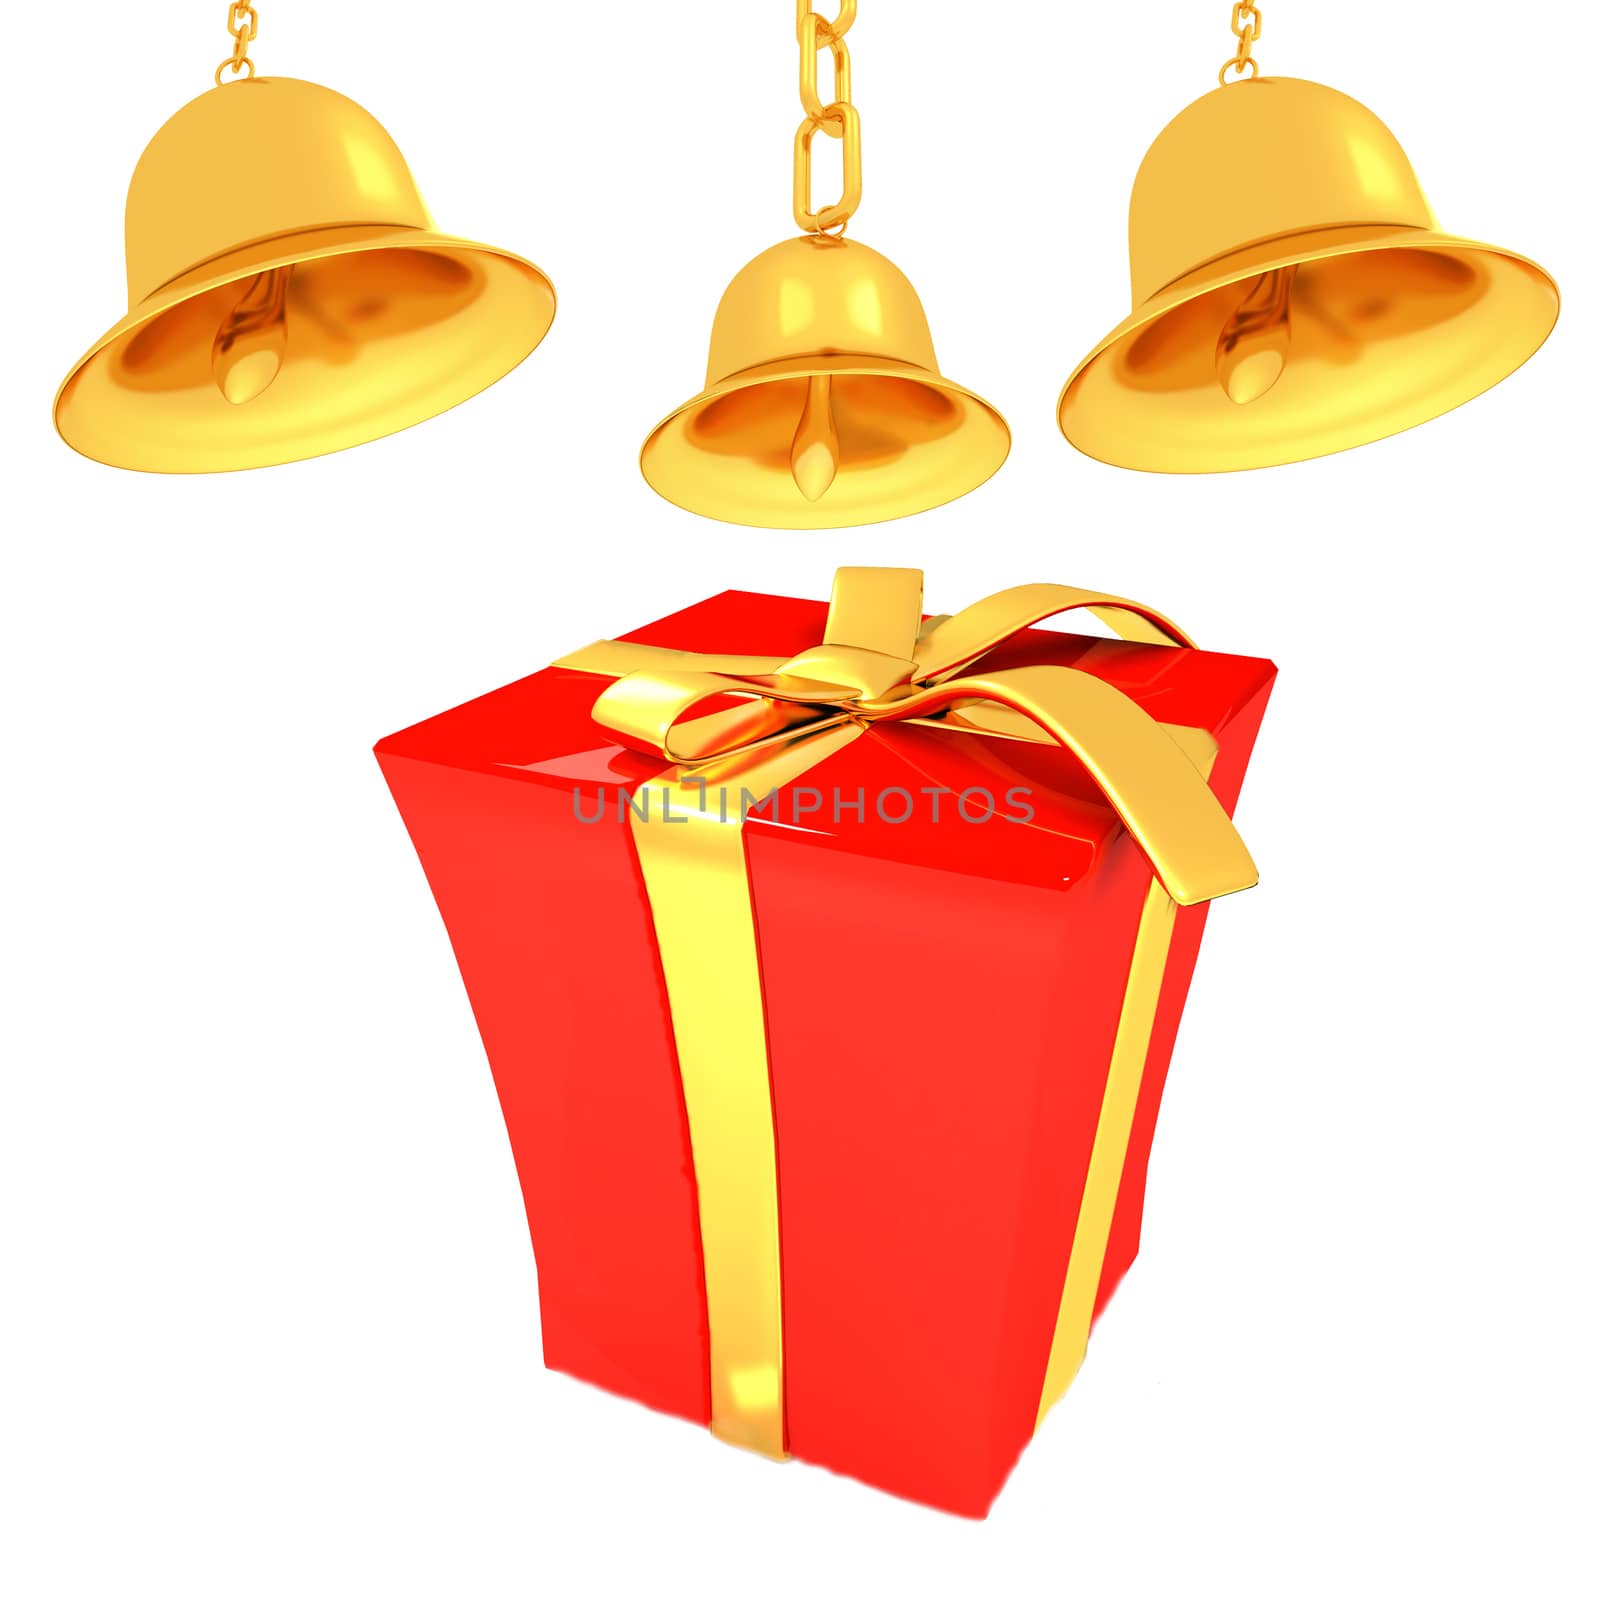 Gold bell and red gift box with golden ribbon by Guru3D